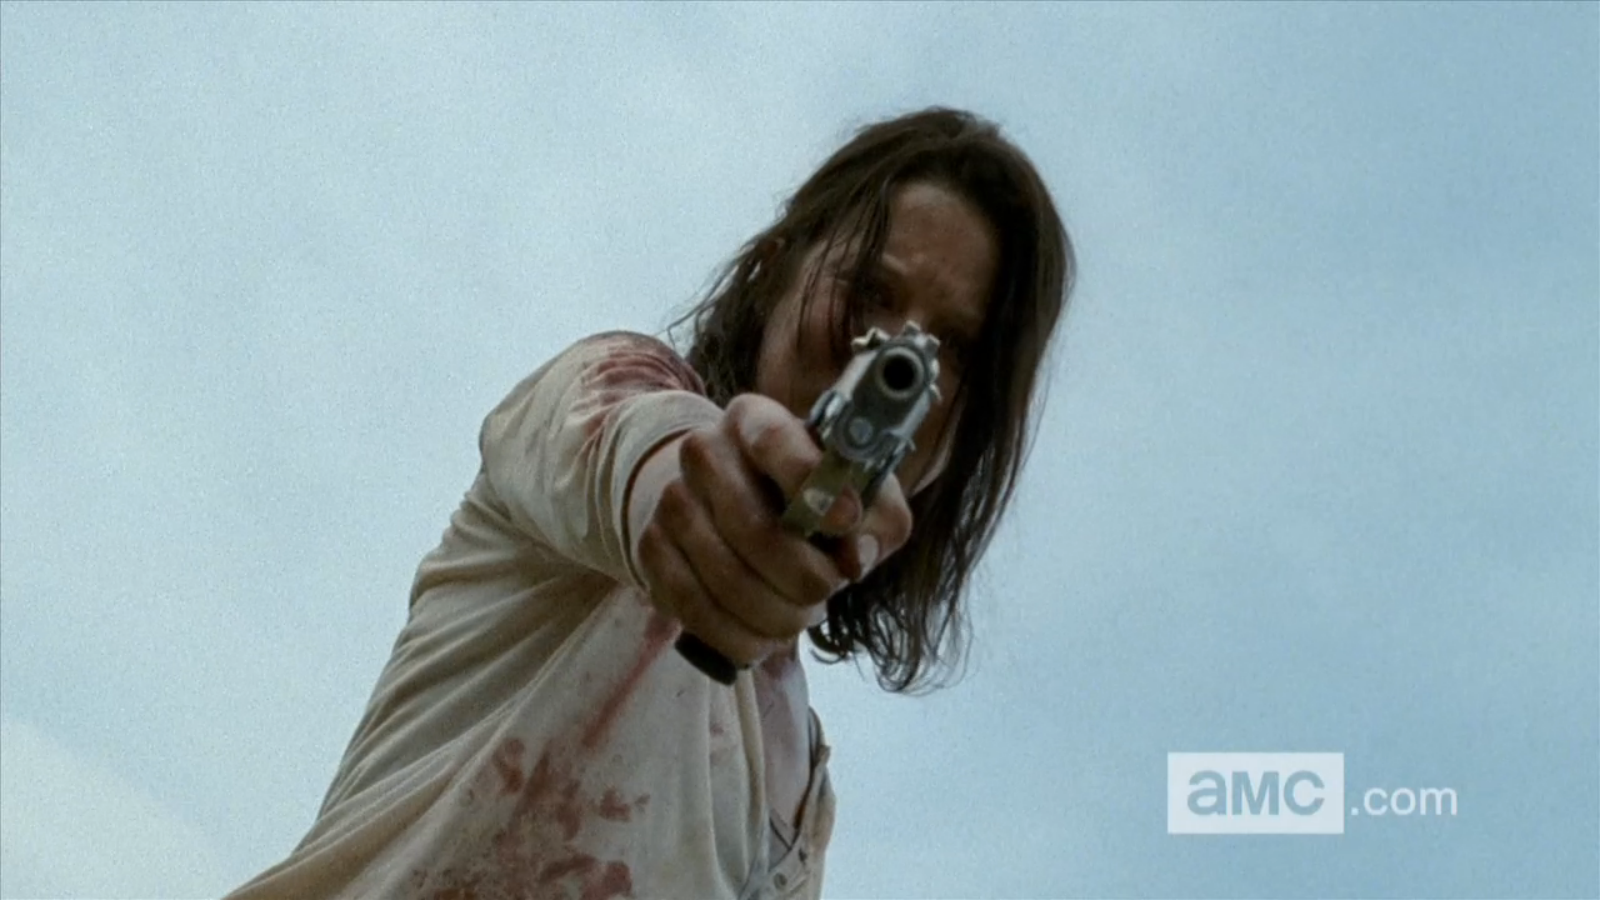 http://img4.wikia.nocookie.net/__cb20131202061417/walkingdead/images/0/00/TFG_Lilly_Before_Shooting.png